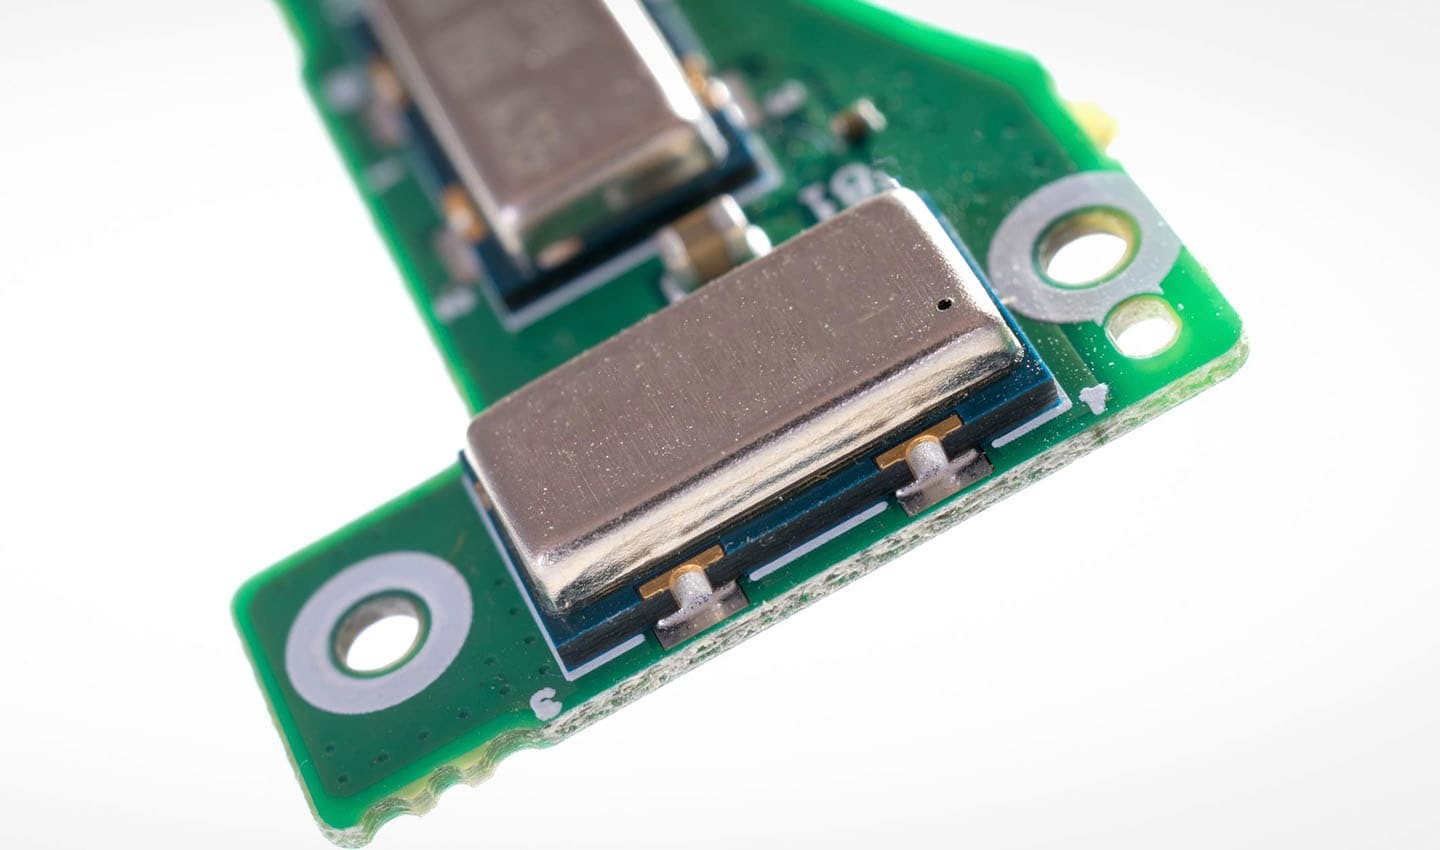 Gyroscope chips look a little something like this. They’re an entire device on a chip. Small and unassuming, but vital to navigation systems.